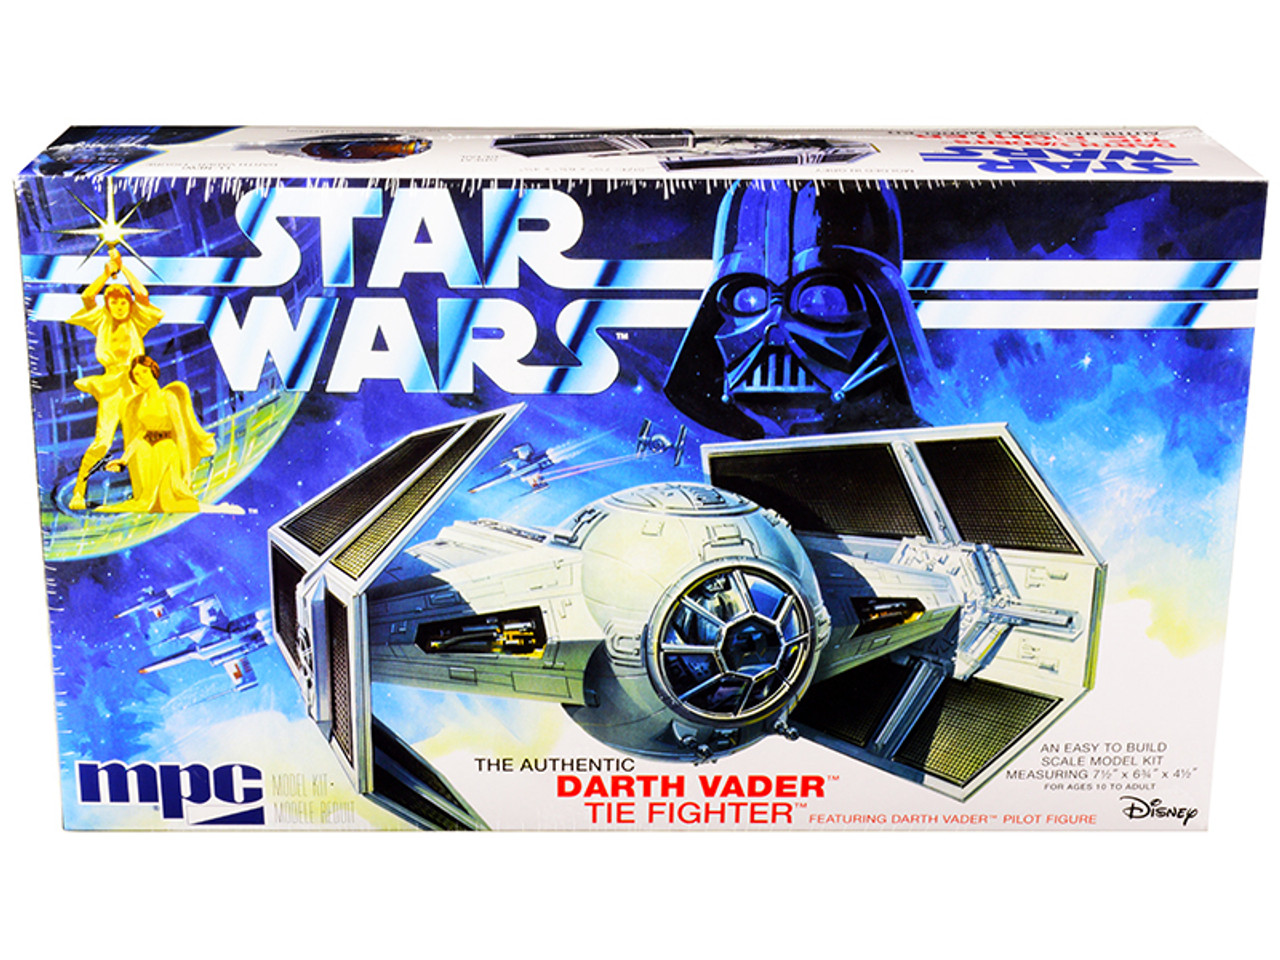 Skill 2 Model Kit Darth Vader's Tie Fighter "Star Wars: Episode IV – A New Hope" (1977) Movie by MPC